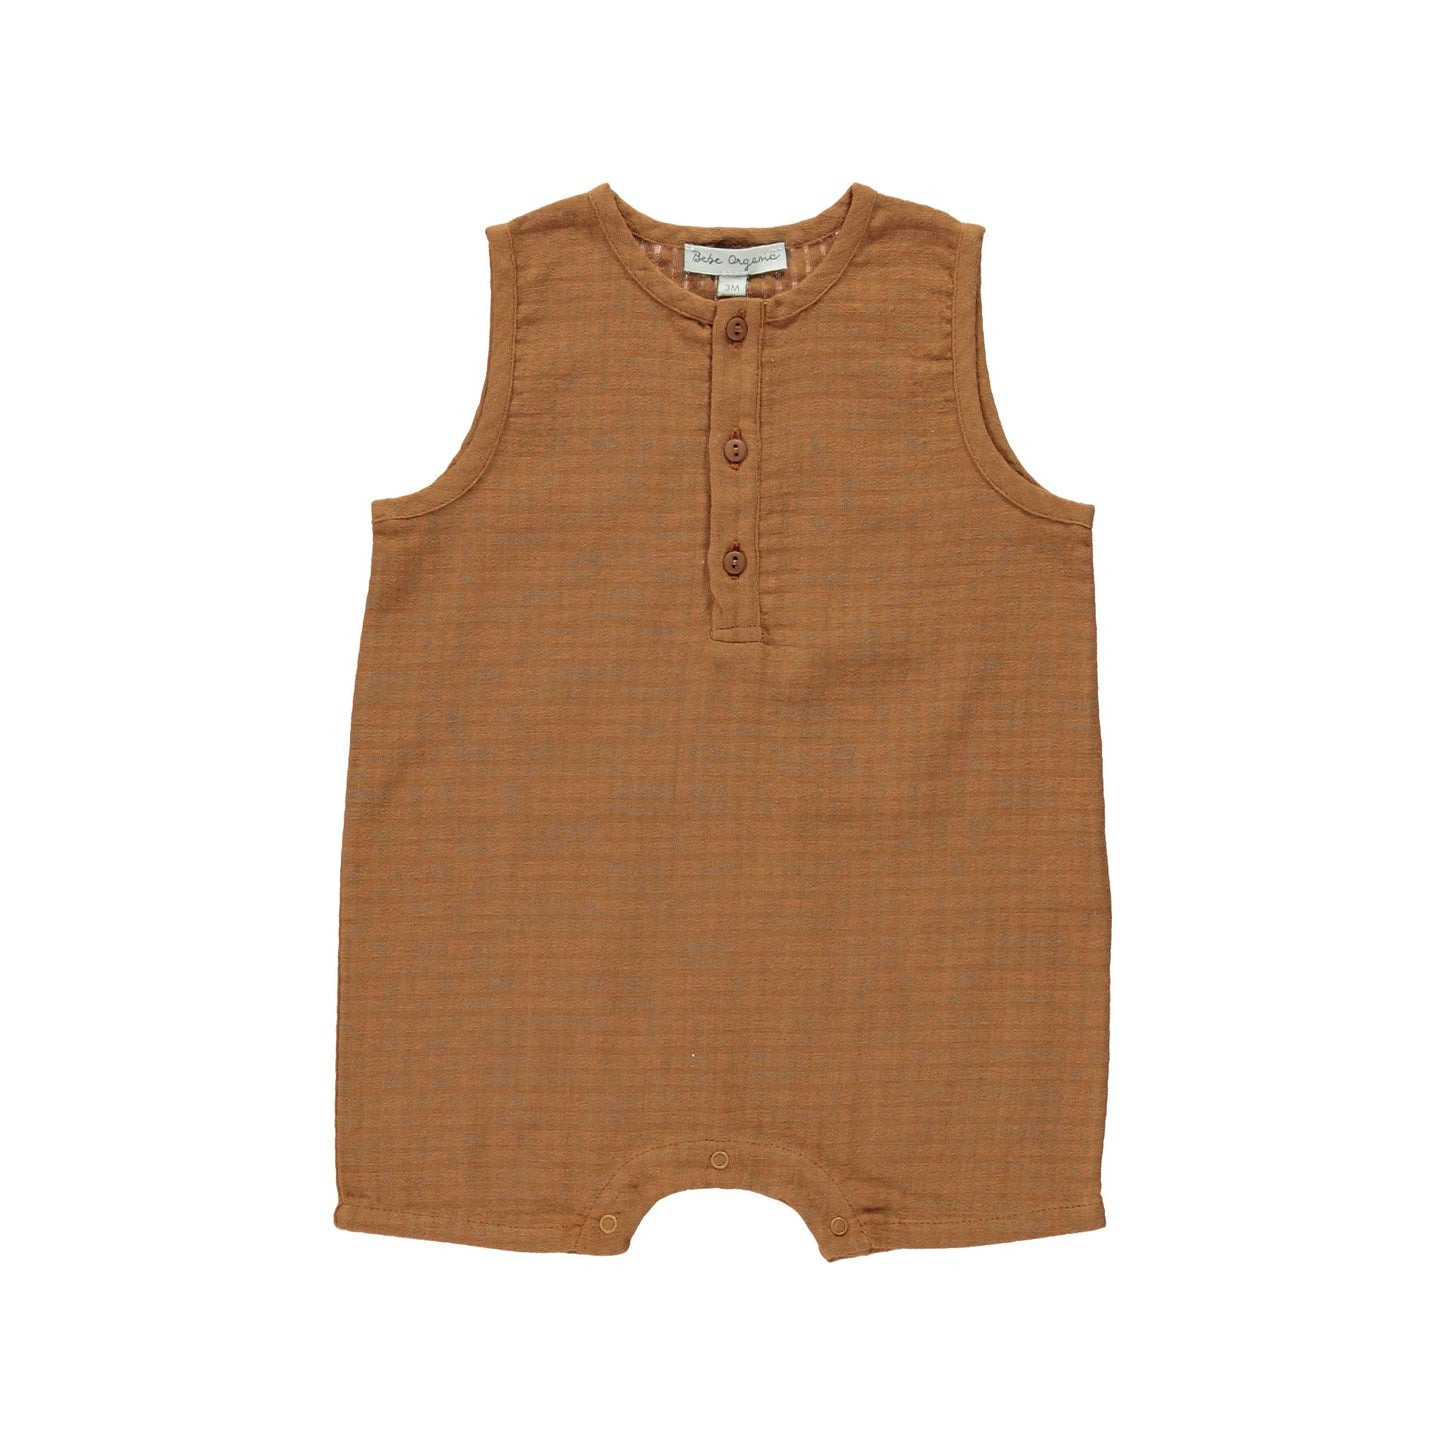 Thorn overalls Baby Grows Bebe Organic 